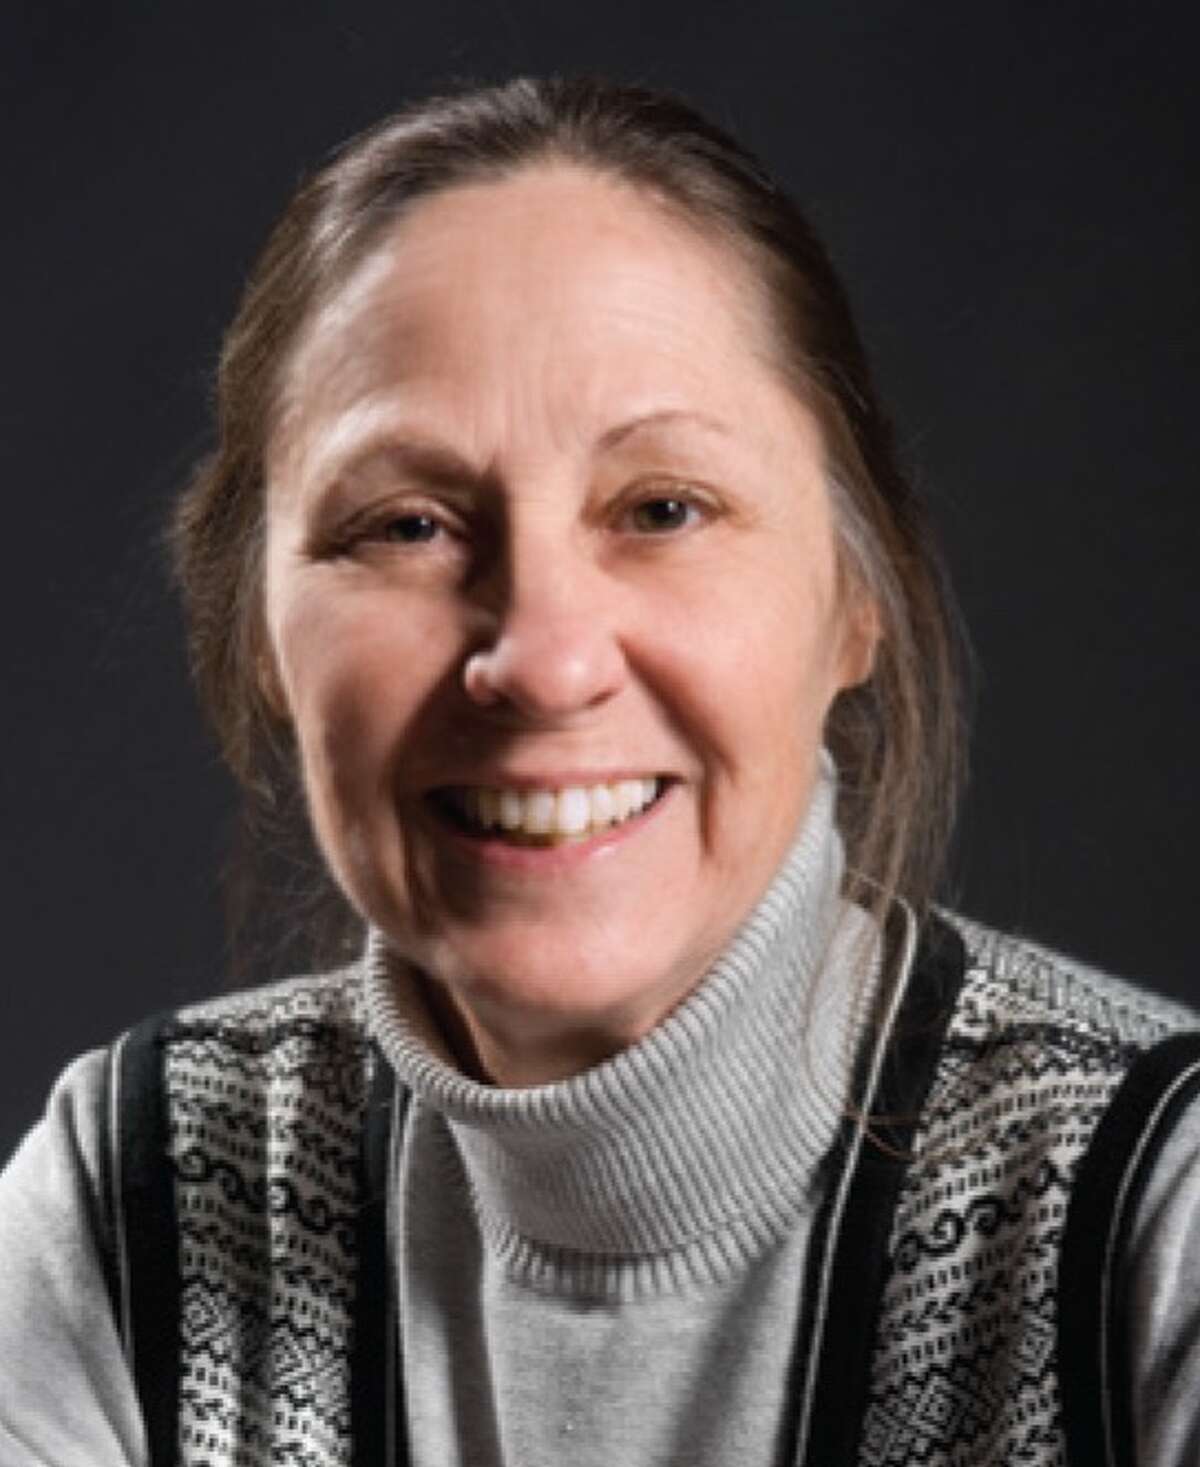 Marjorie Corcoran, a Rice University physics professor, was killed on Feb. 3 as she cycled to campus. Corcoran was struck by a Metro light rail train as she crossed the southbound tracks at Fannin near Sunset.